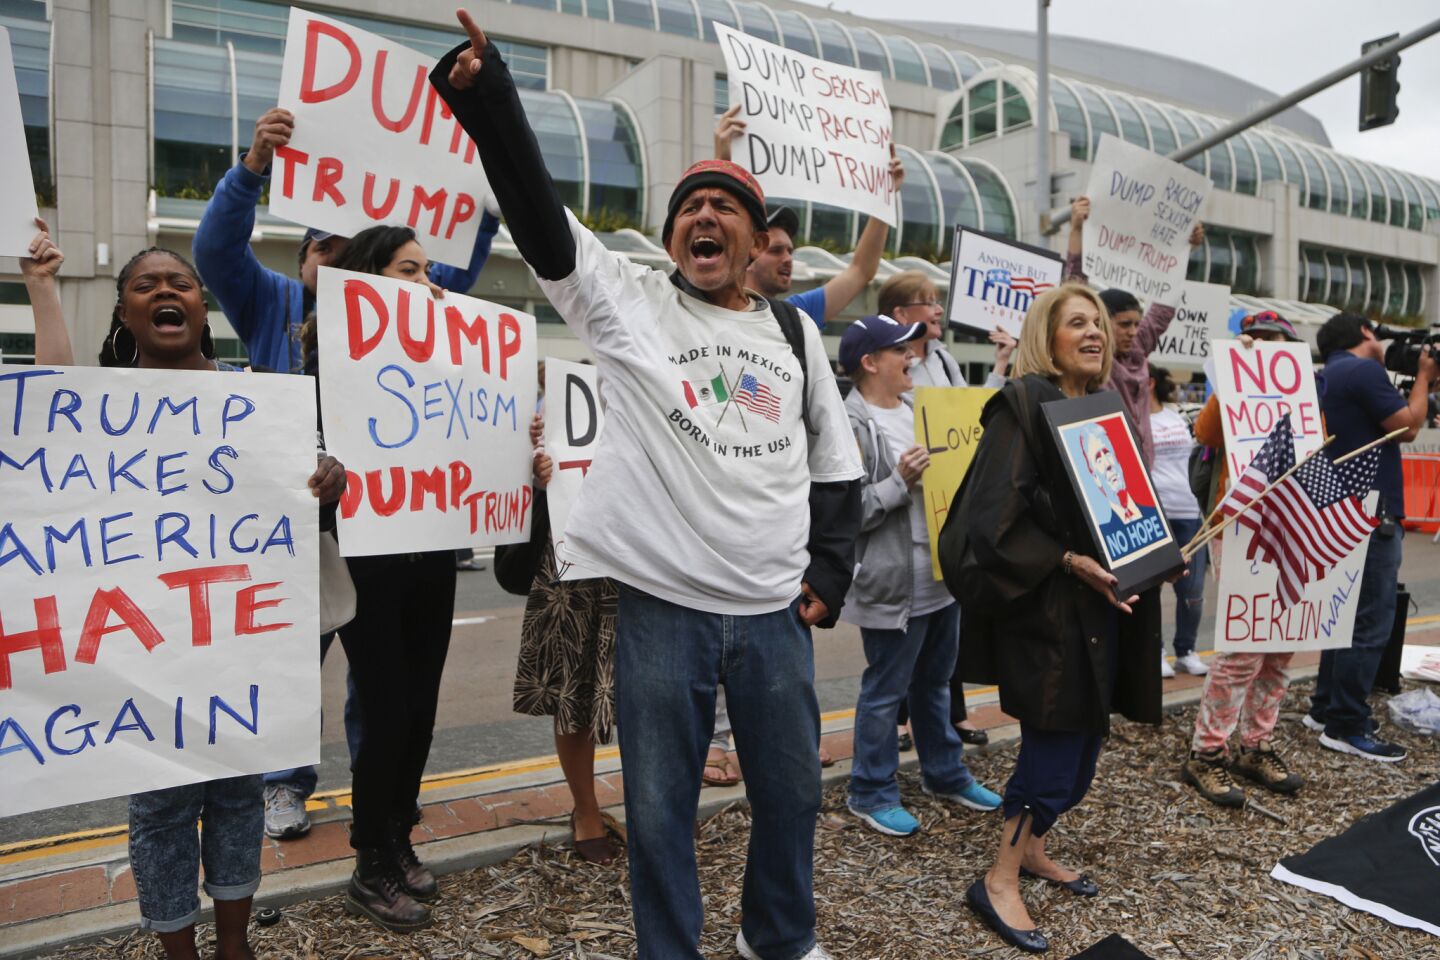 Protest outside Trump rally in San Diego